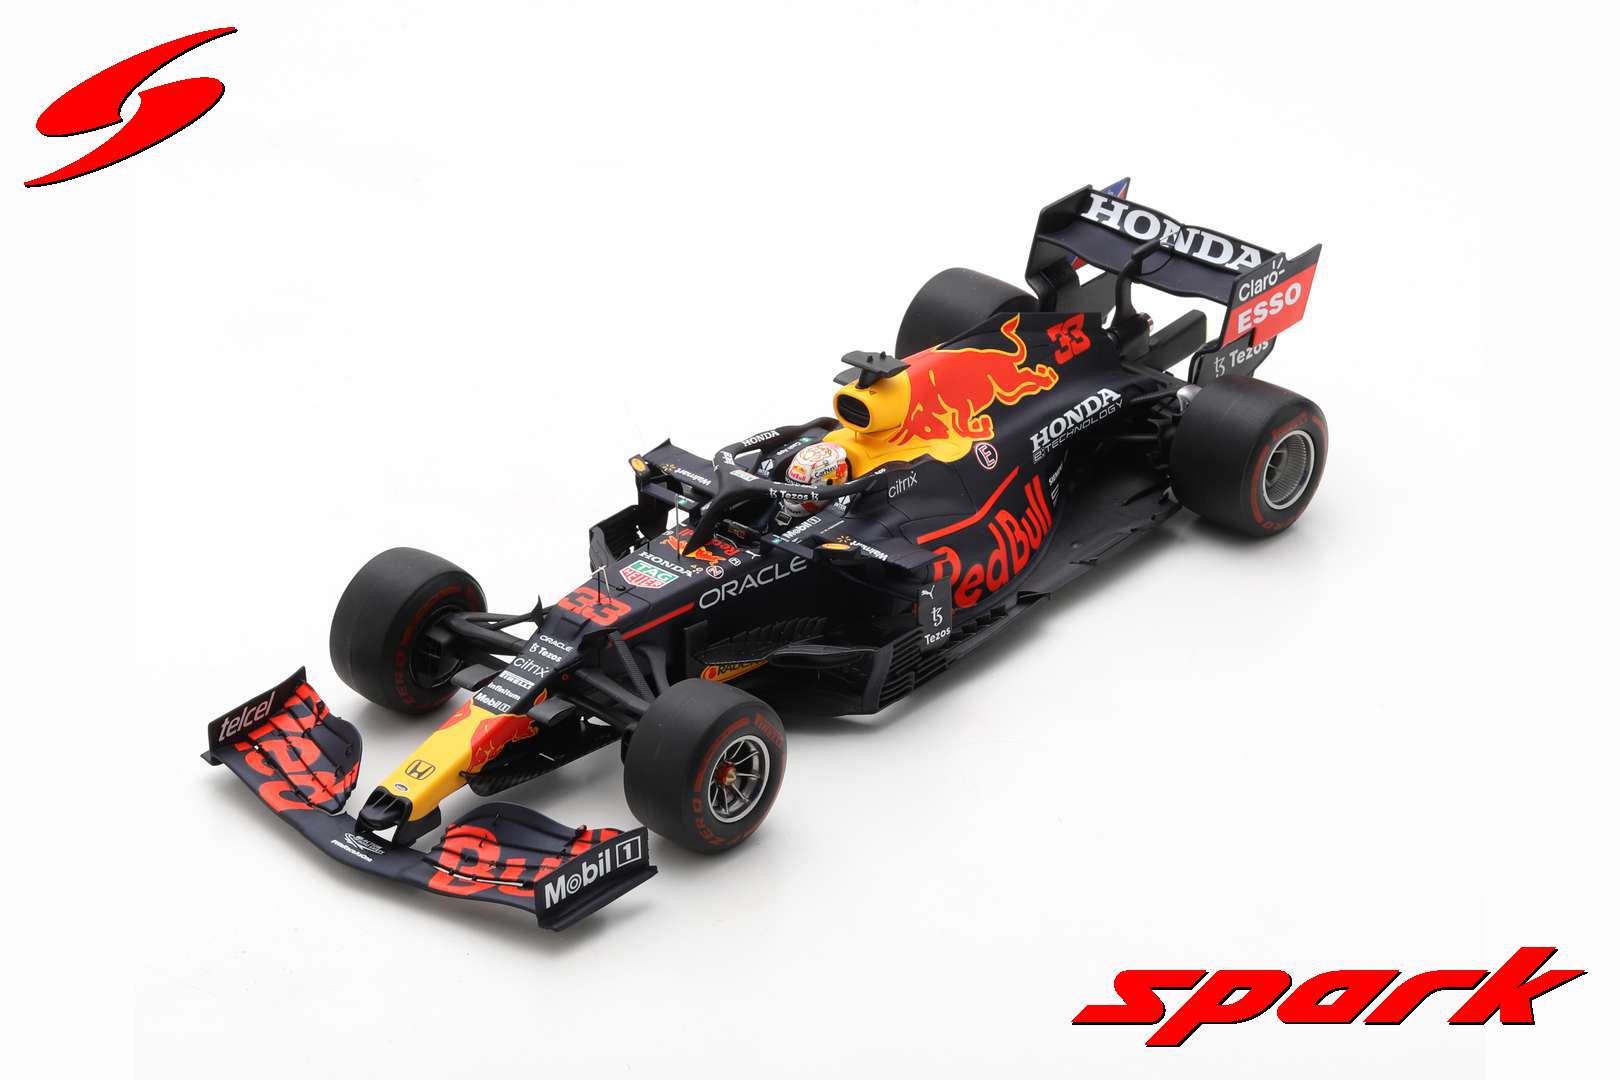 1/18 2021 Bull Racing Honda RB16B No.33 Max Verstappen Abu Dhabi With No.1 Board and Pit With Acrylic Cover By Spark | Pasteiner's